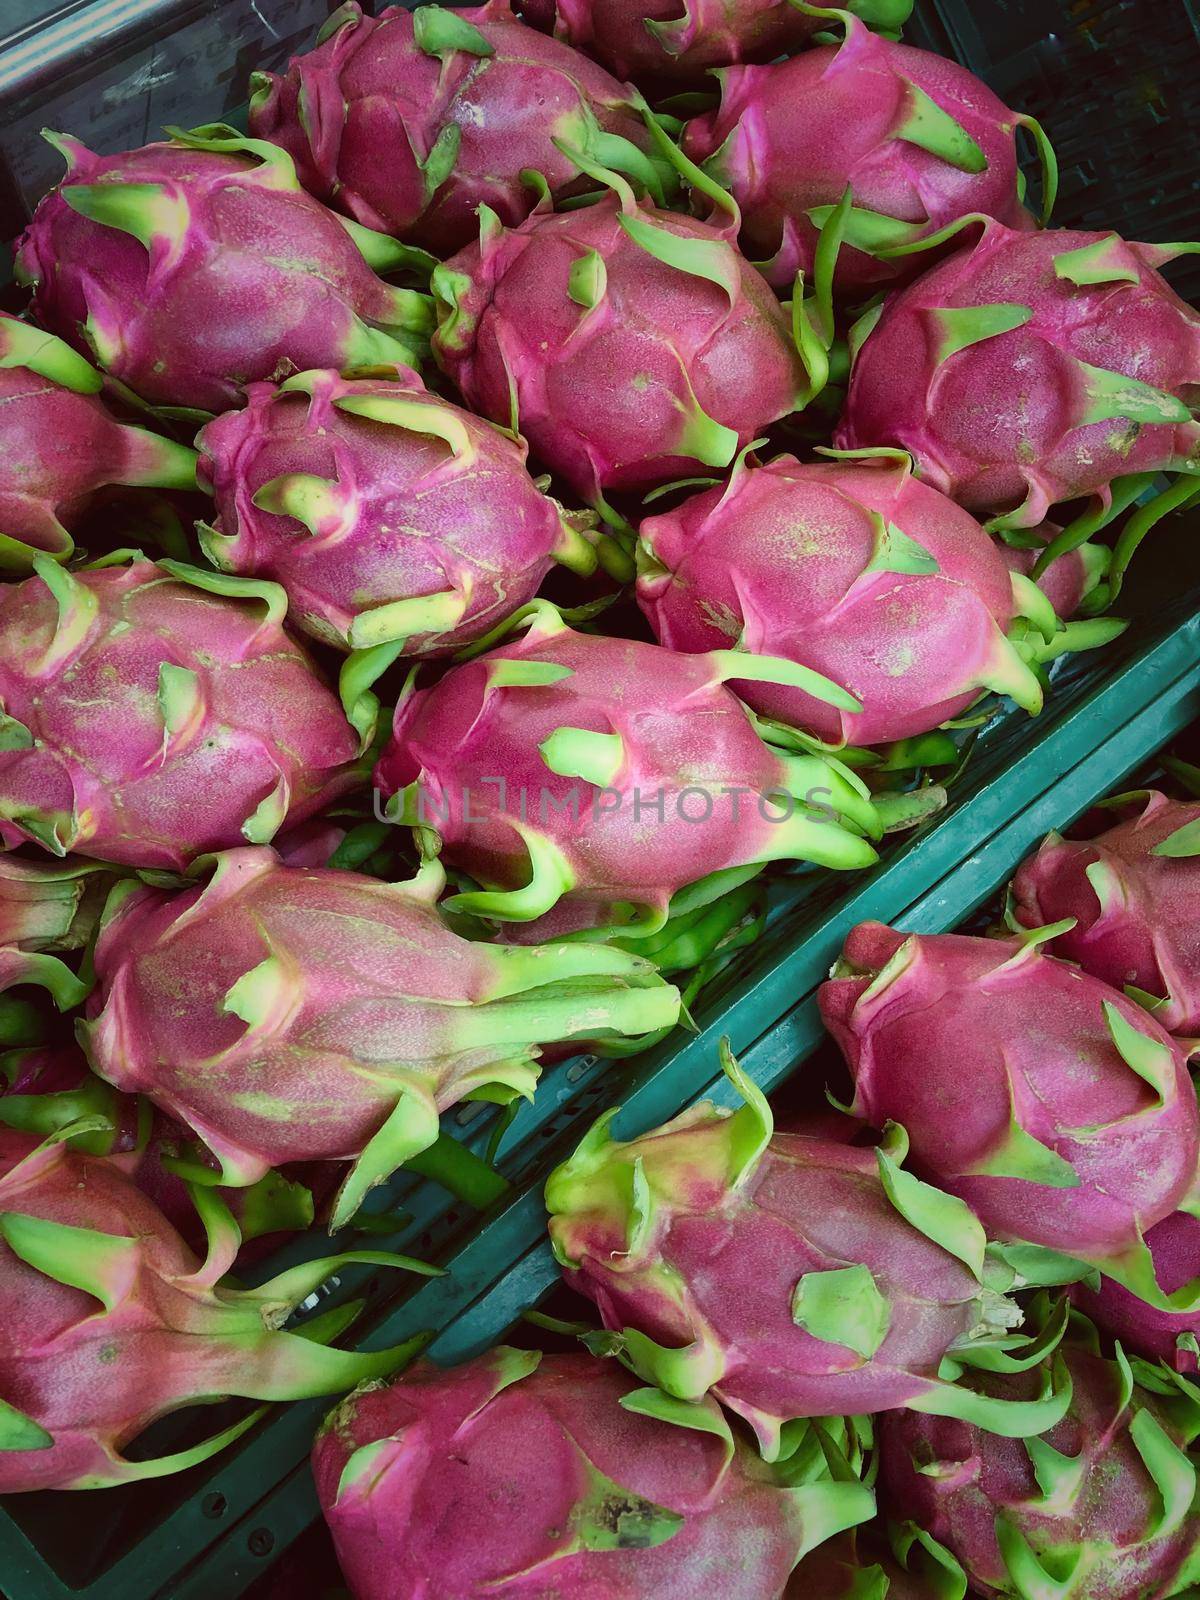 Dragon fruit in the market in thailand by NarinNonthamand